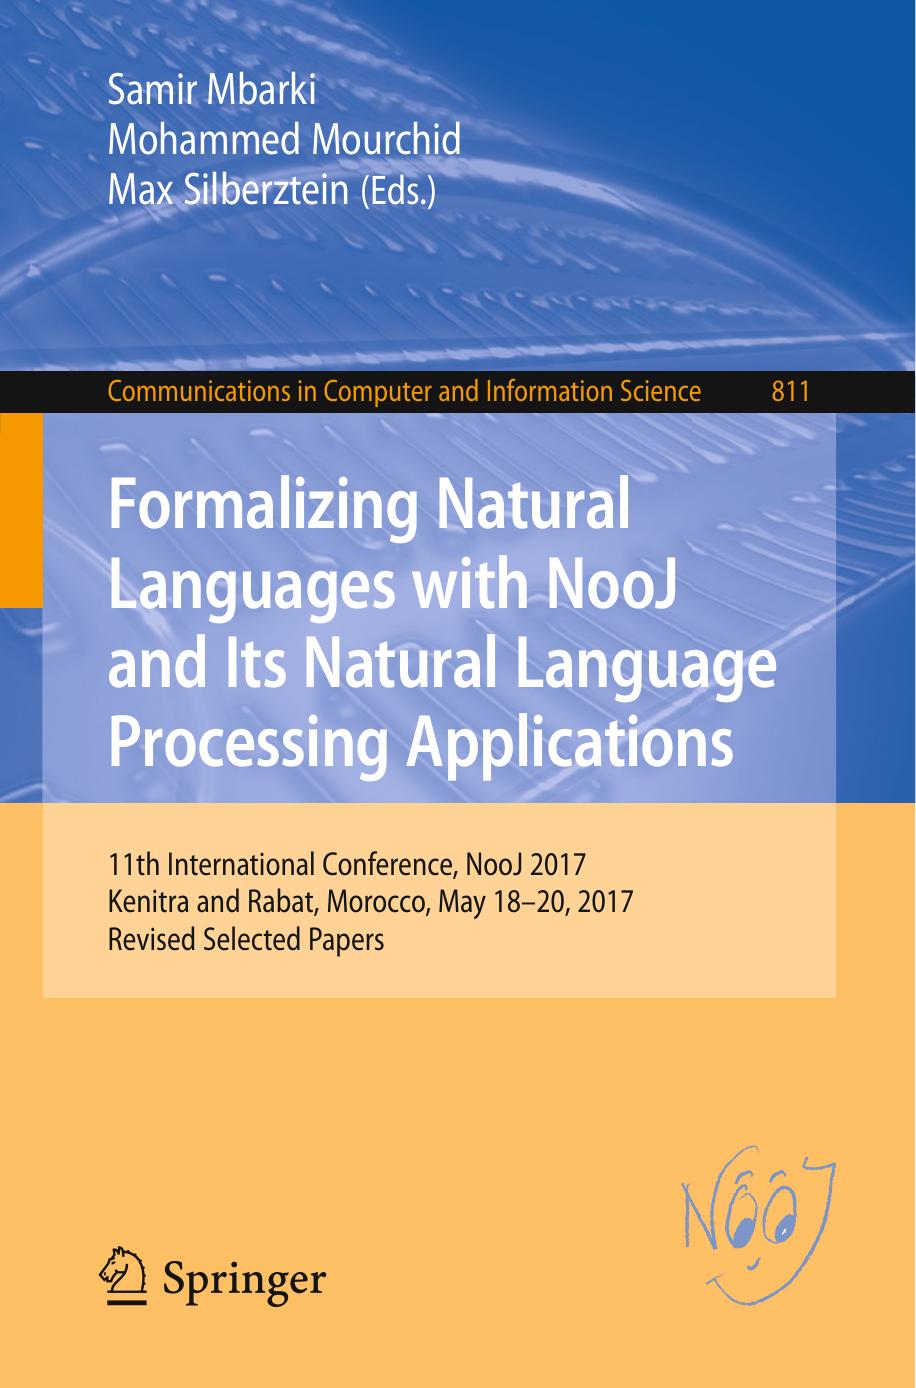 Formalizing Natural Languages with NooJ and Its Natural Language Processing Applications: 11th International Conference, NooJ 2017, Kenitra and Rabat, Morocco, May 18–20, 2017, Revised Selected Papers